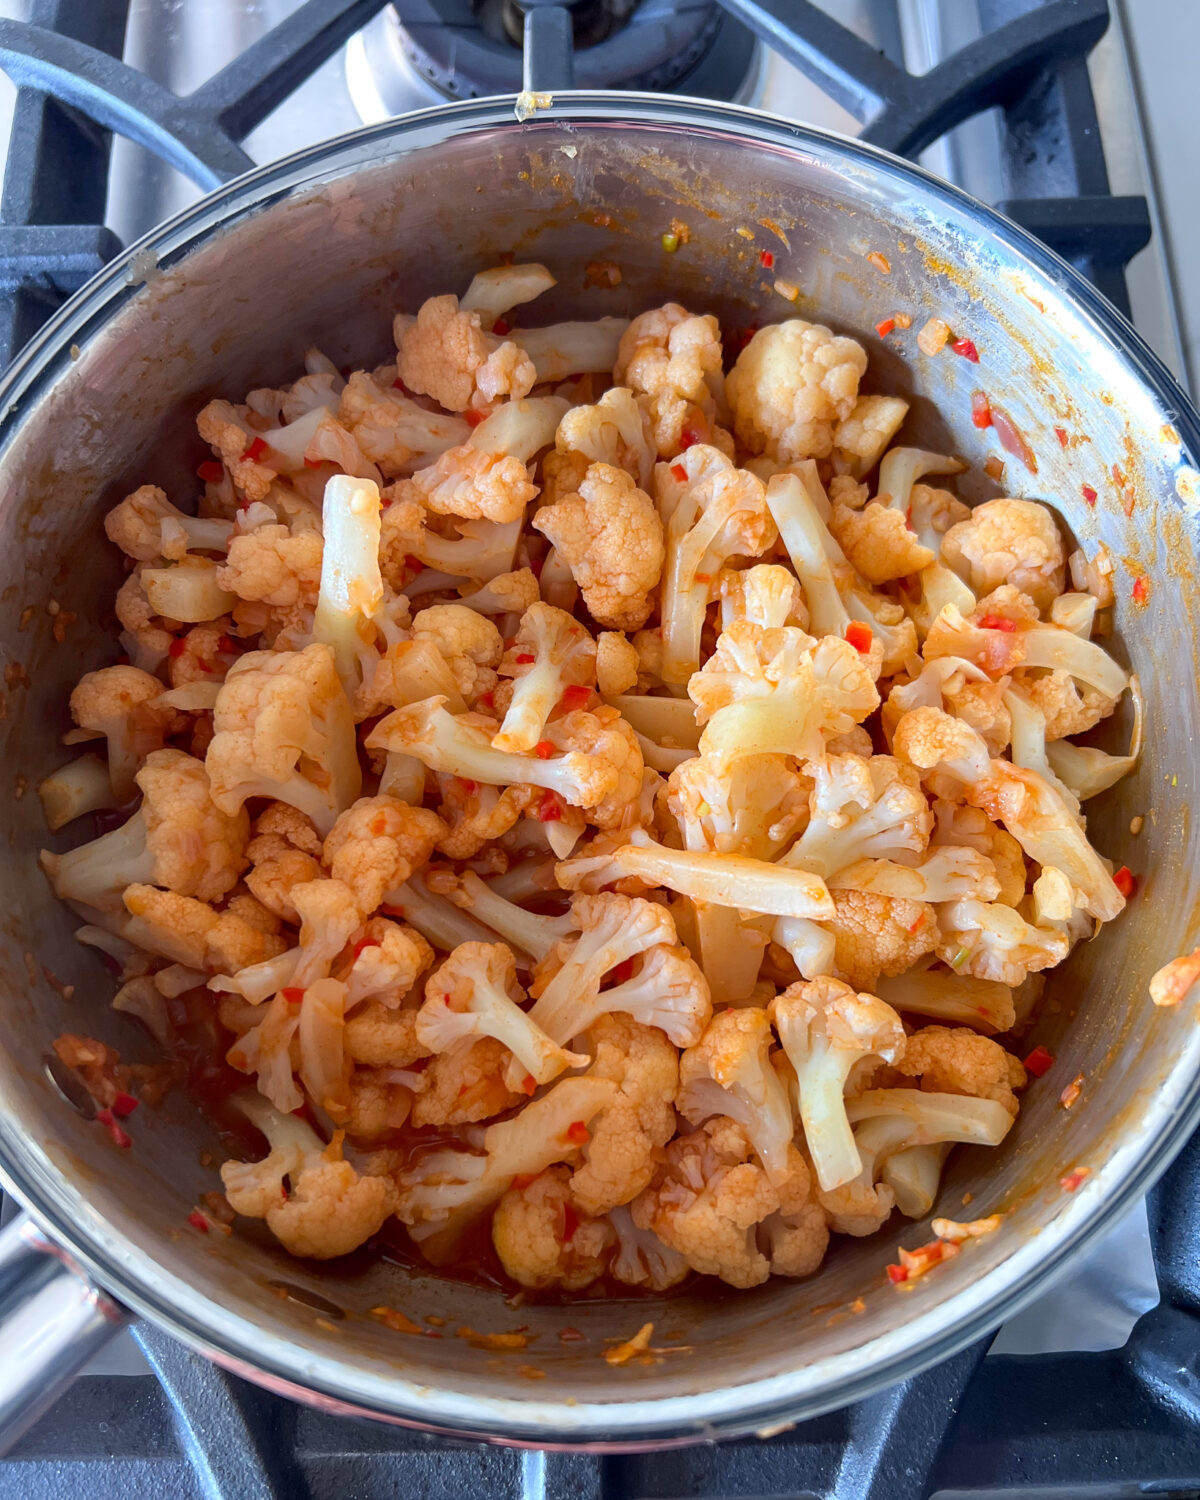 Cauliflower cooked in Buffalo sauce and chilies.